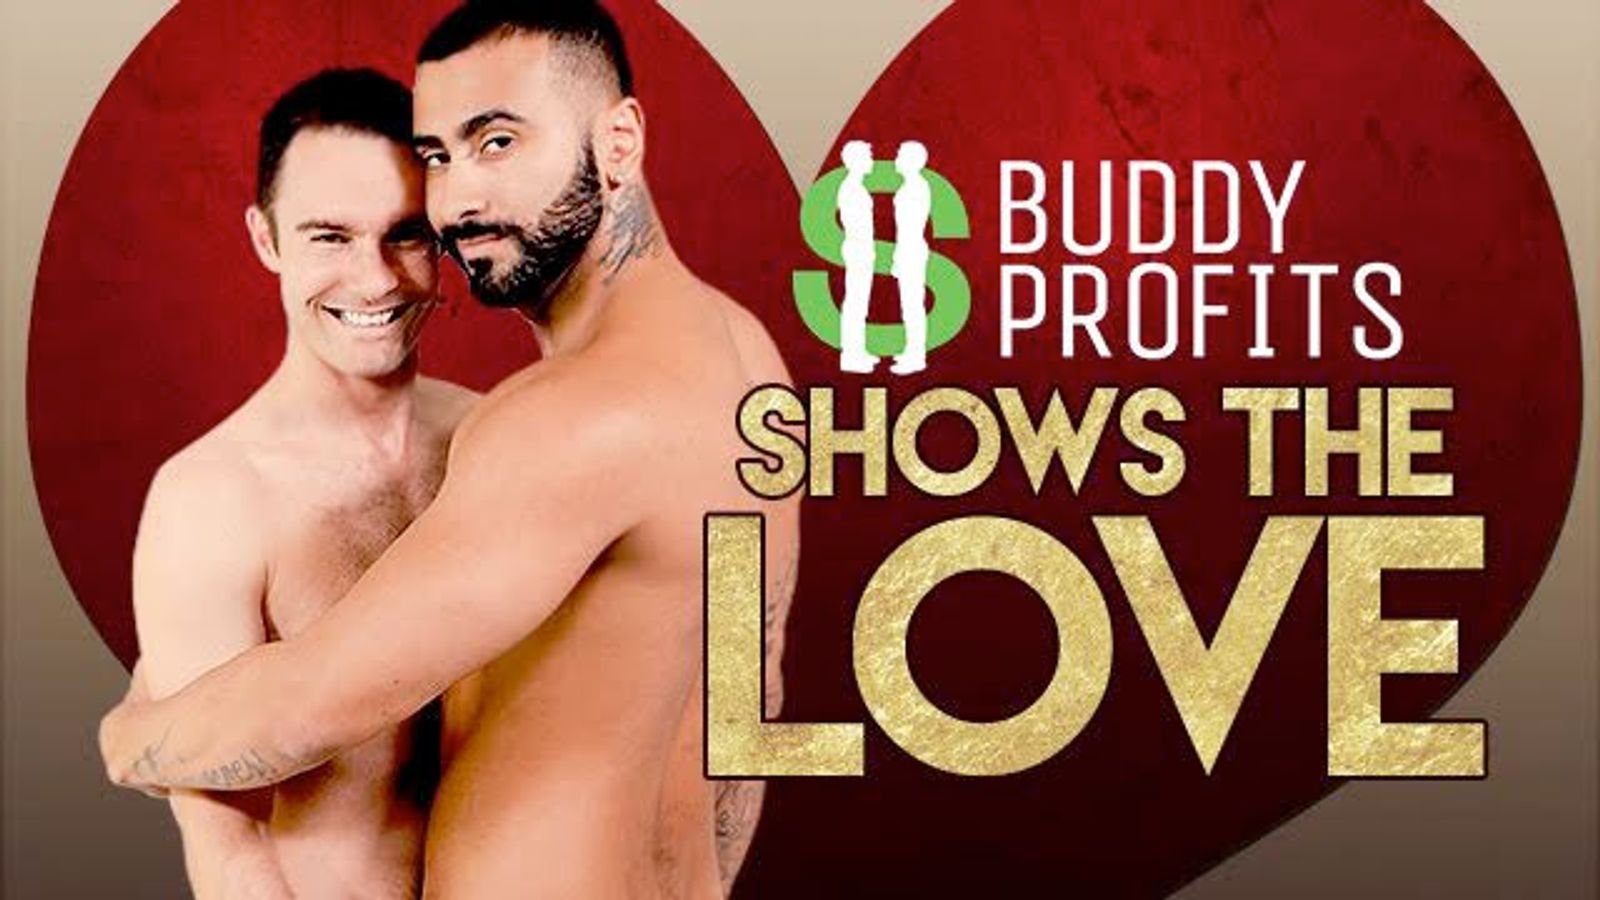 Buddy Profits Offers Special Promotions for Valentine’s Day